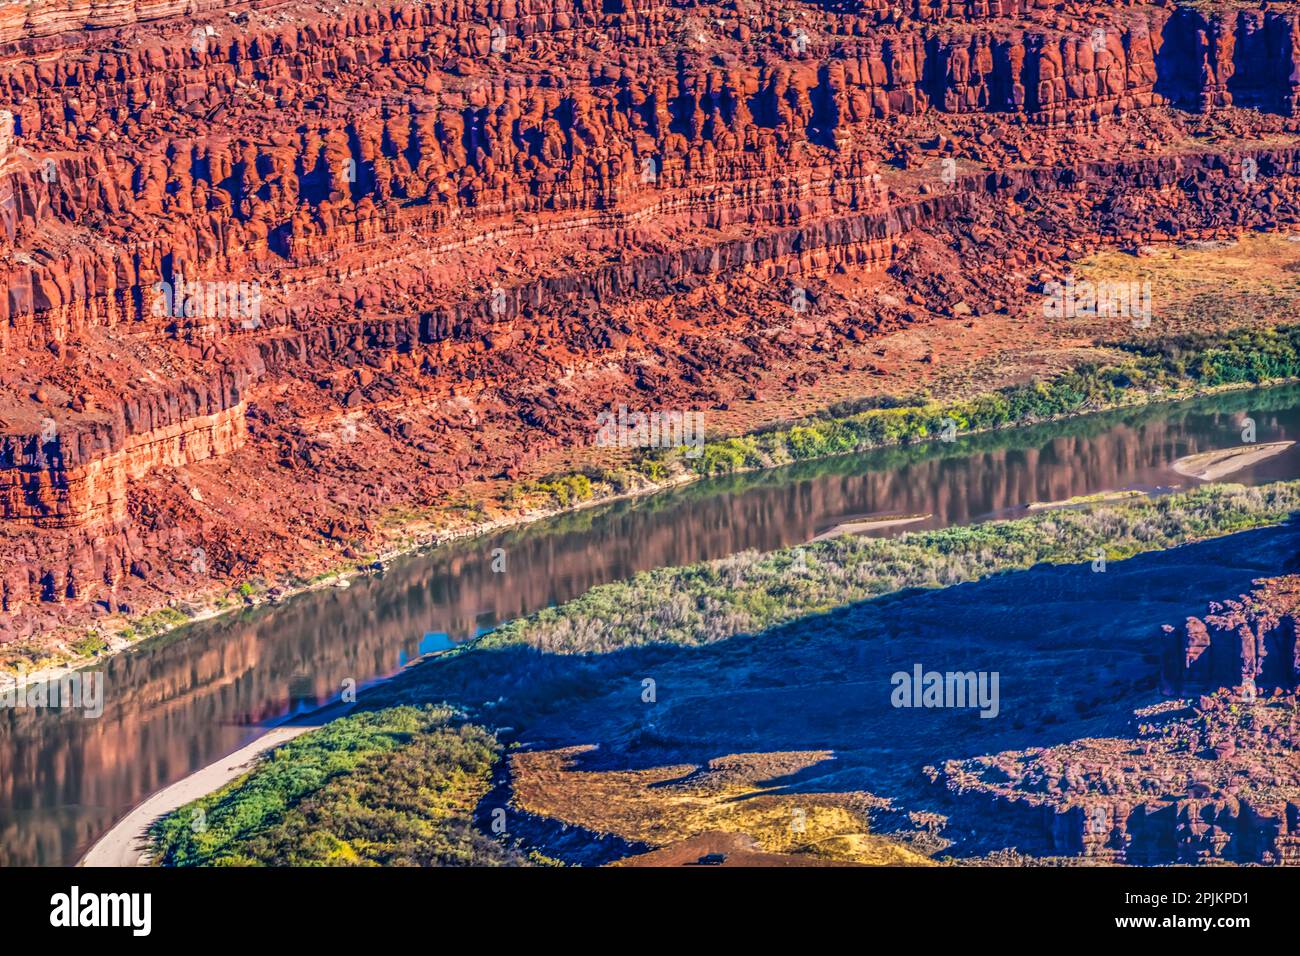 Green River, Grand View point Overlook, Red Rock Canyons, Parc national de Canyonlands, Moab, Utah. Banque D'Images